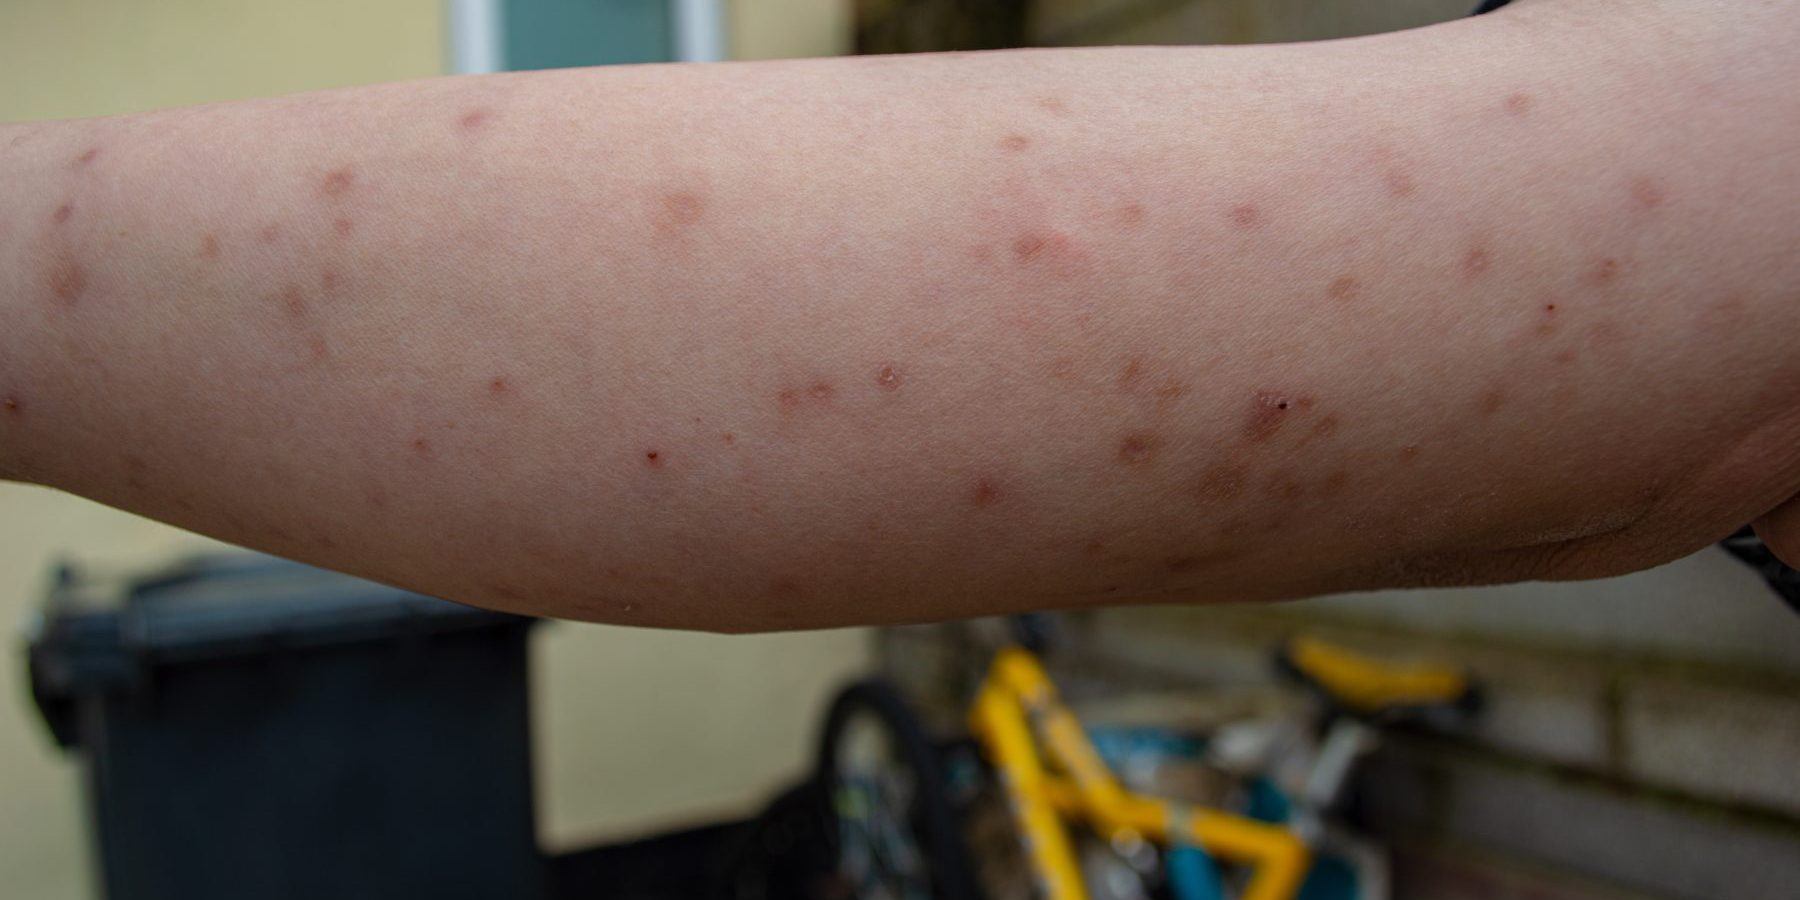 Over-The-Counter Products For Bed Bug Bite Scars